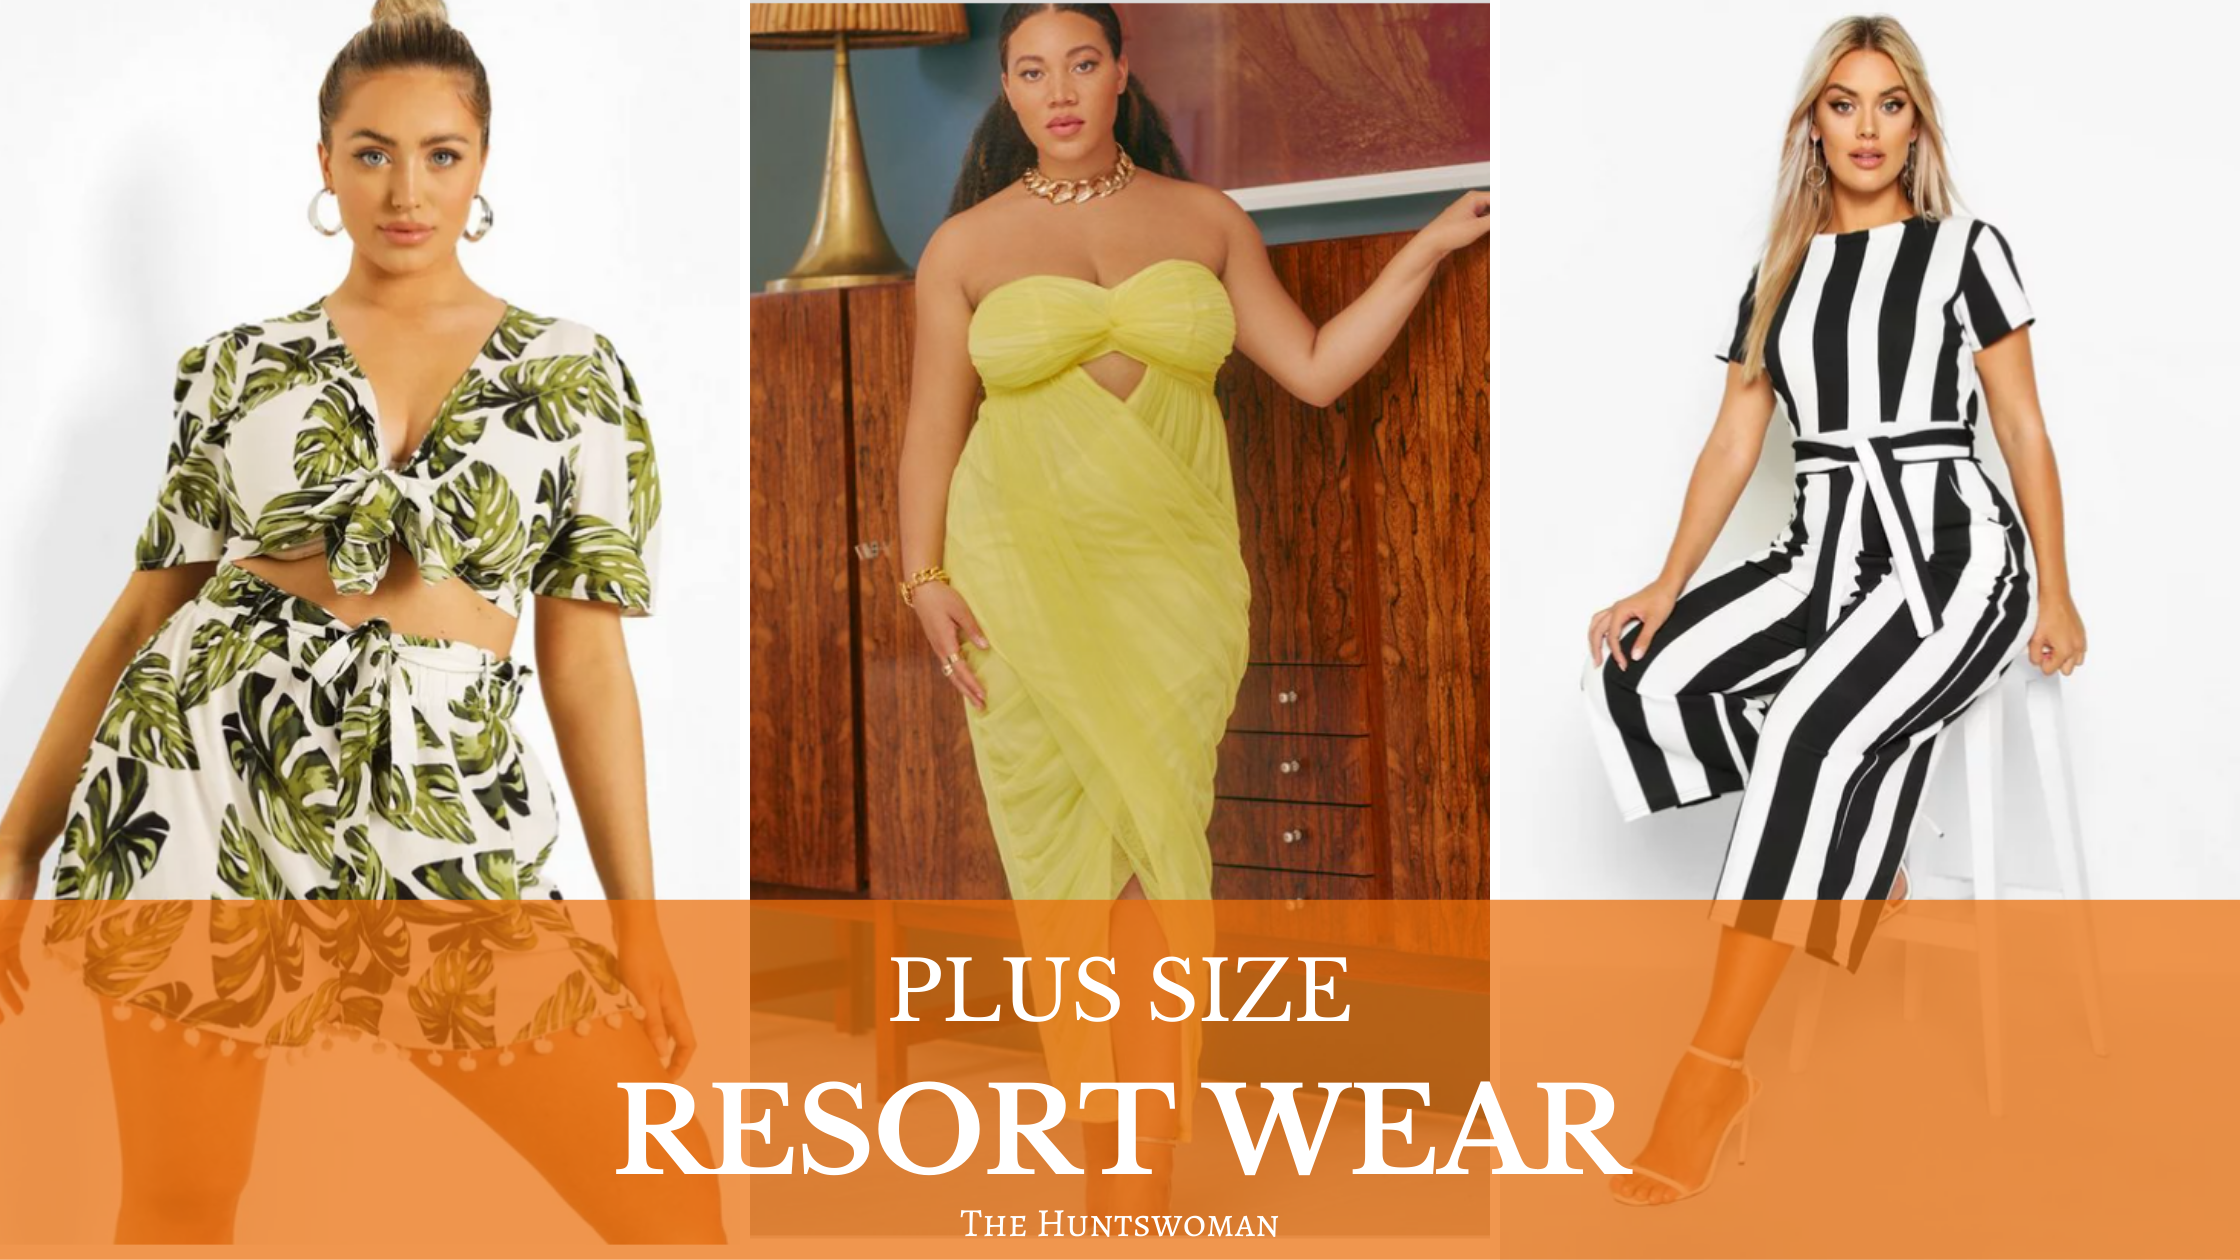 Where to Shop for Plus Size Resort Wear ...